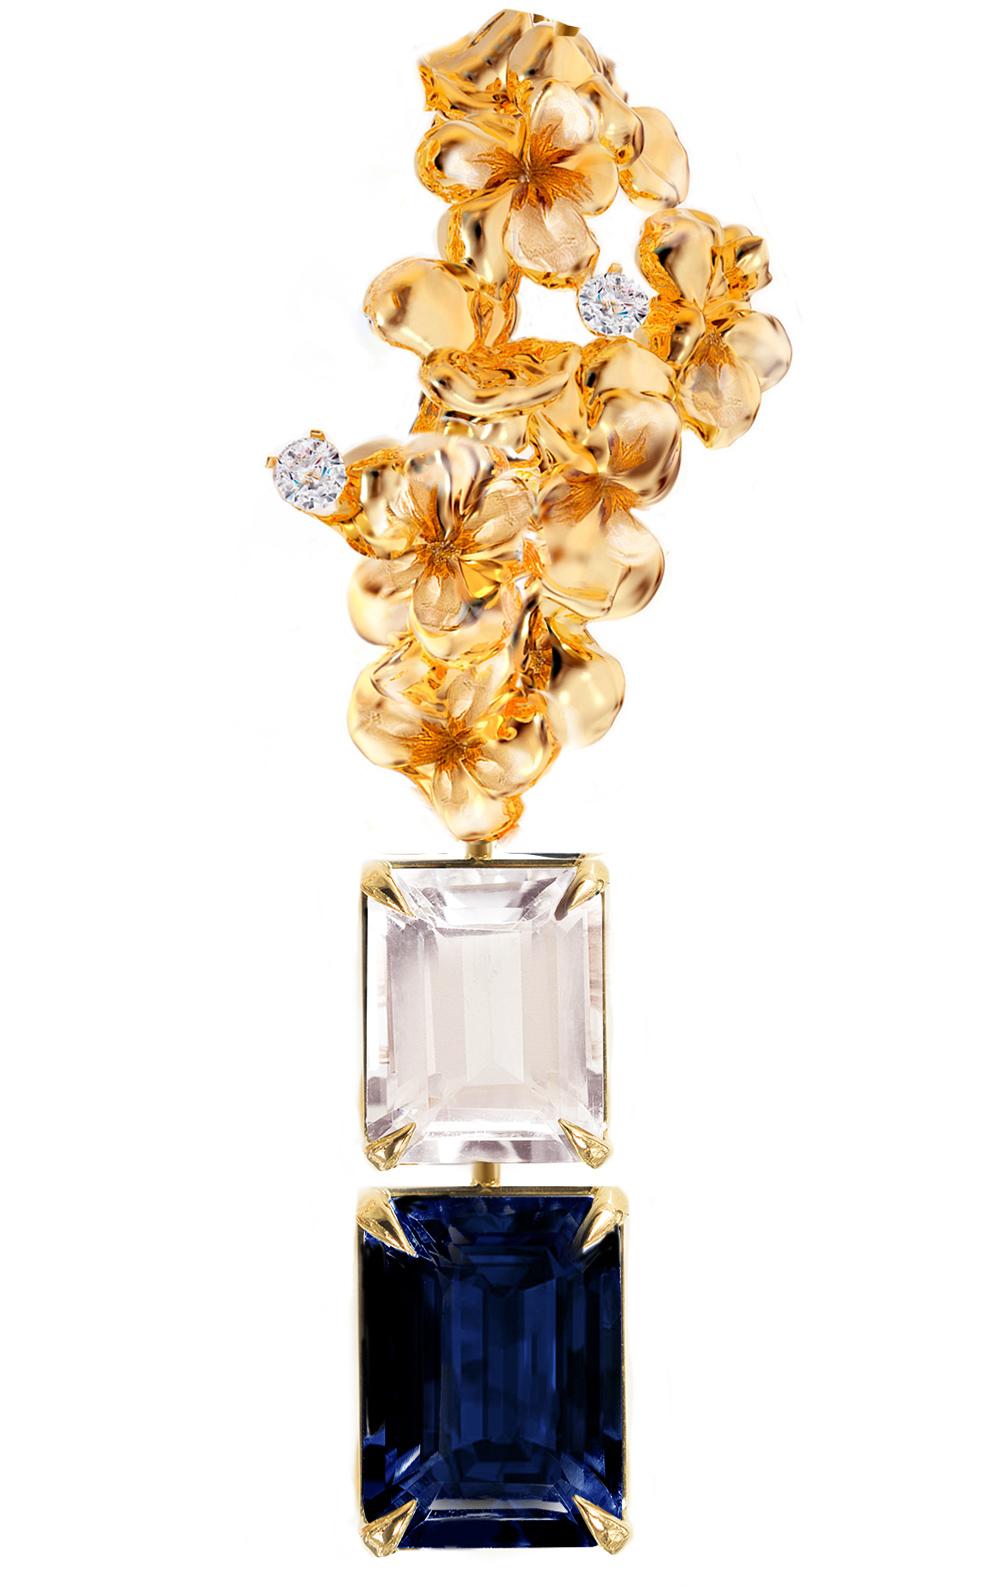 These contemporary 18 karat yellow gold Hortensia cocktail stud earrings are encrusted with round diamonds and sapphires and morganites. This jewellery collection was featured in Vogue UA review.
One earring is around 4 cm long. We use top natural